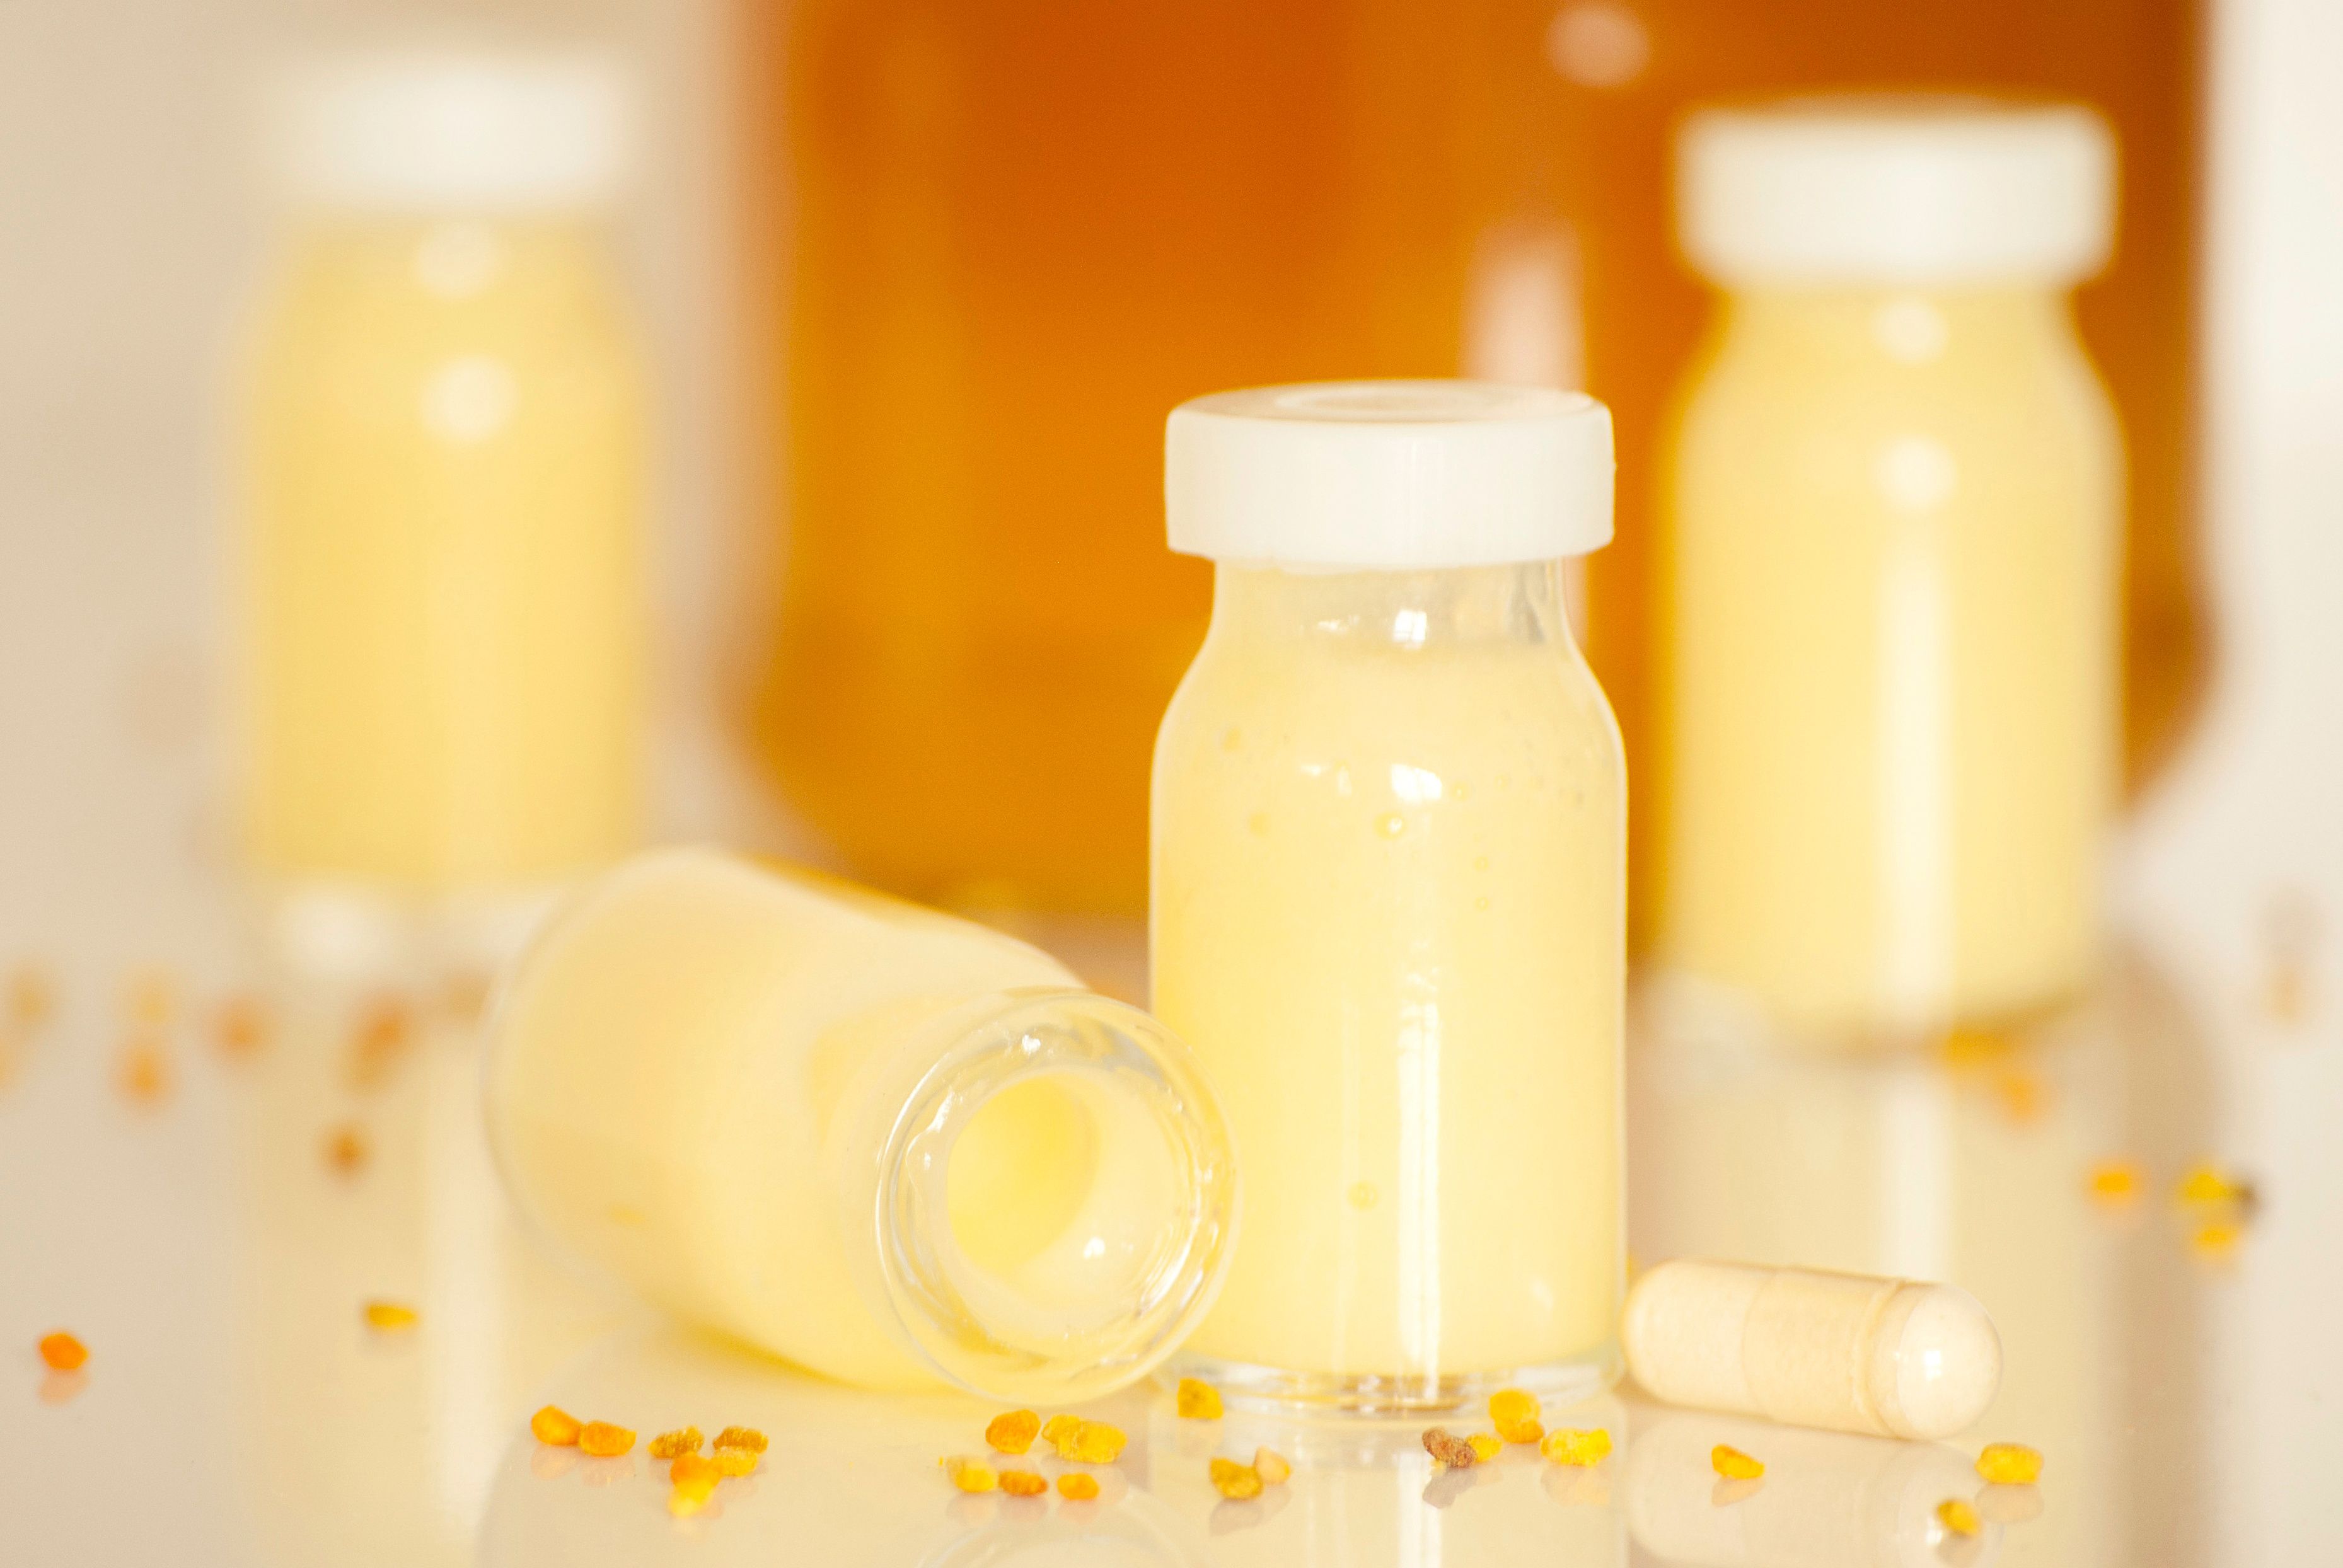 Royal jelly is sold in various forms, such as a gel-like substance or freeze-dried powder capsules.